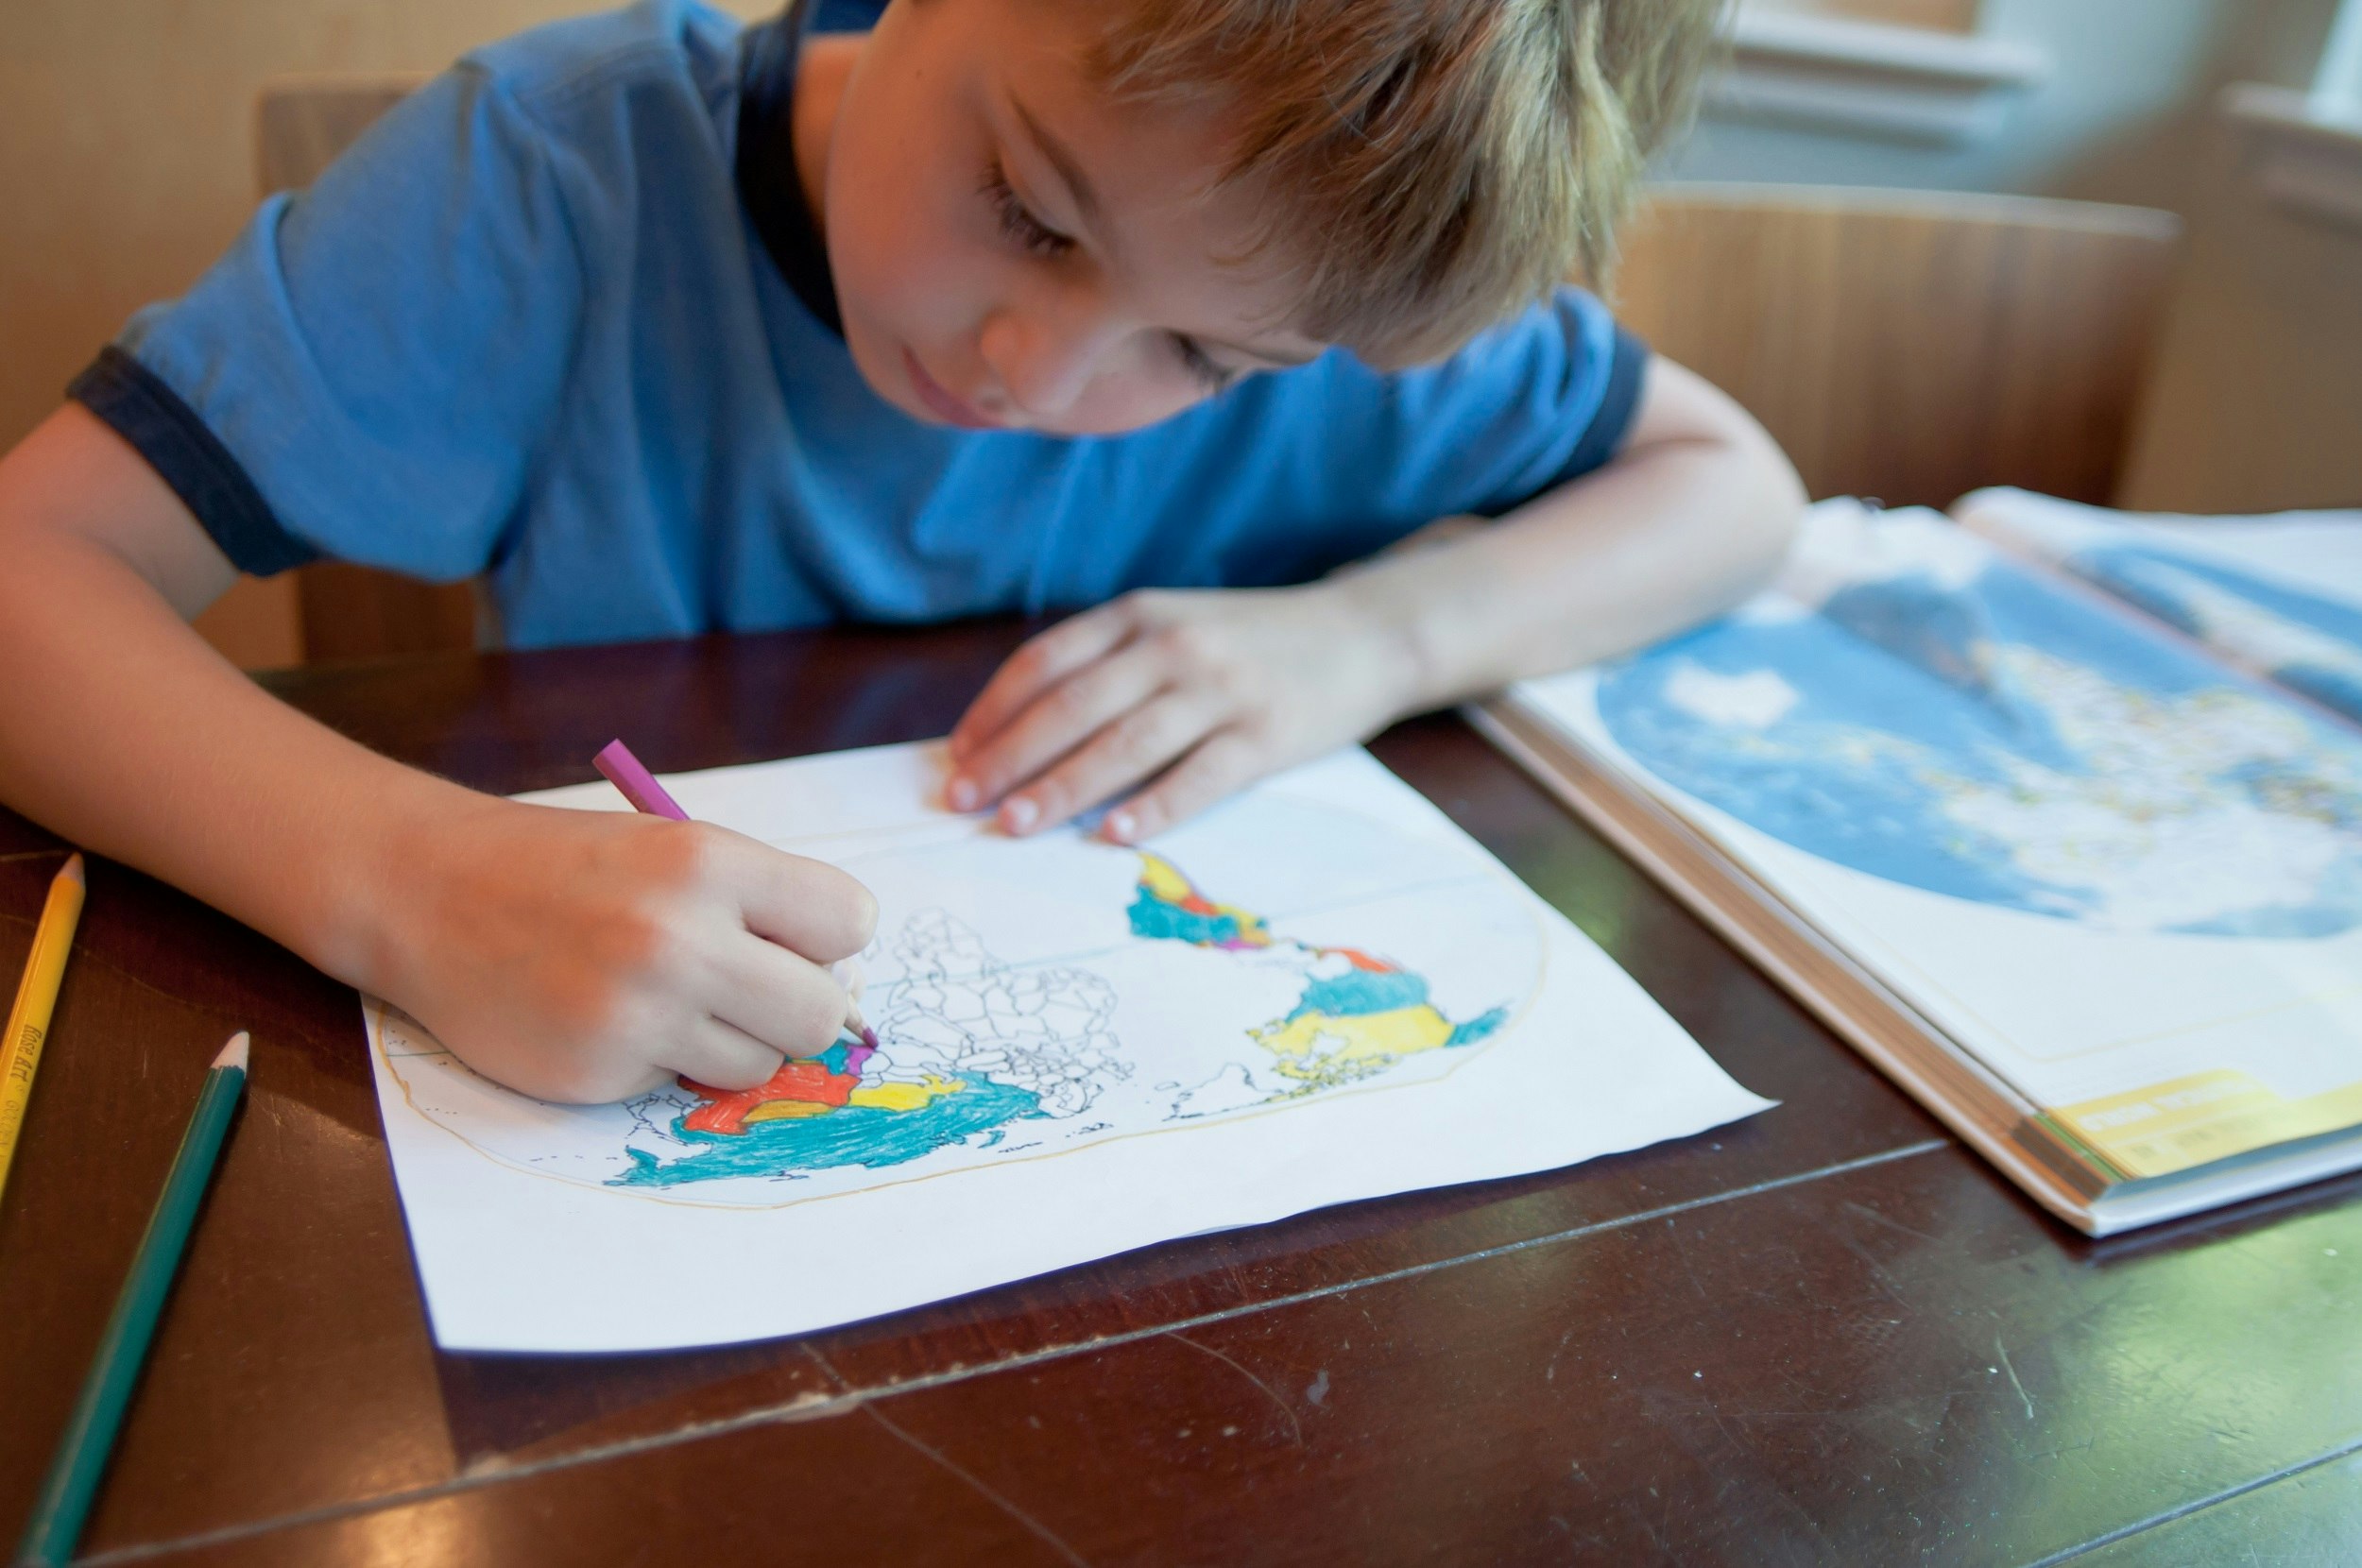 A young boy leans over his world map that he's colouring in. Next to him is an open atlas